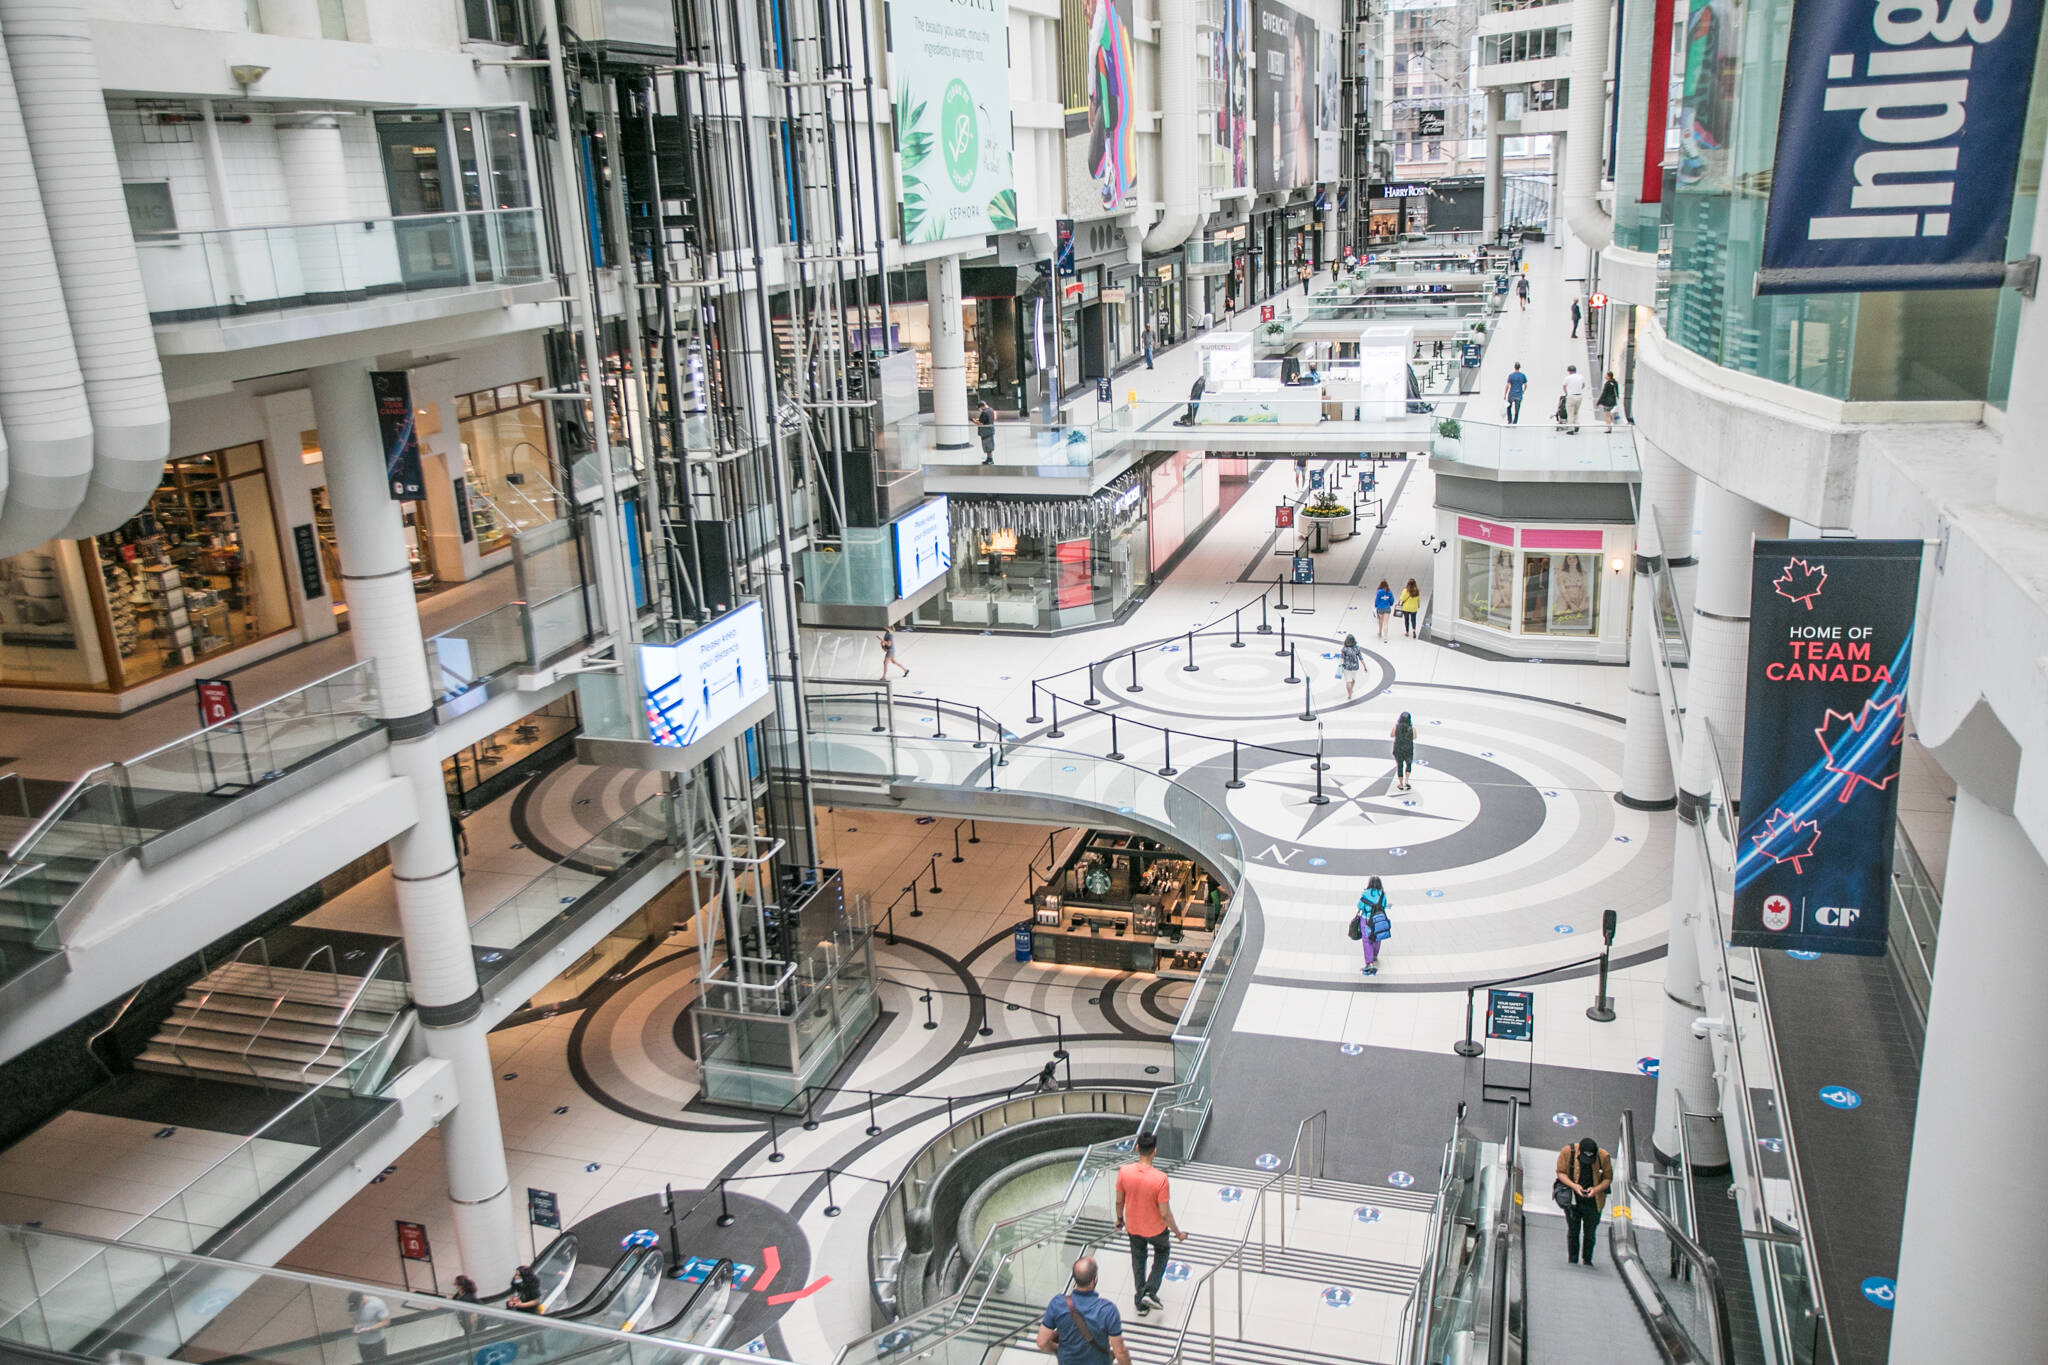 Toronto Eaton Centre is one of the best places to shop in Toronto